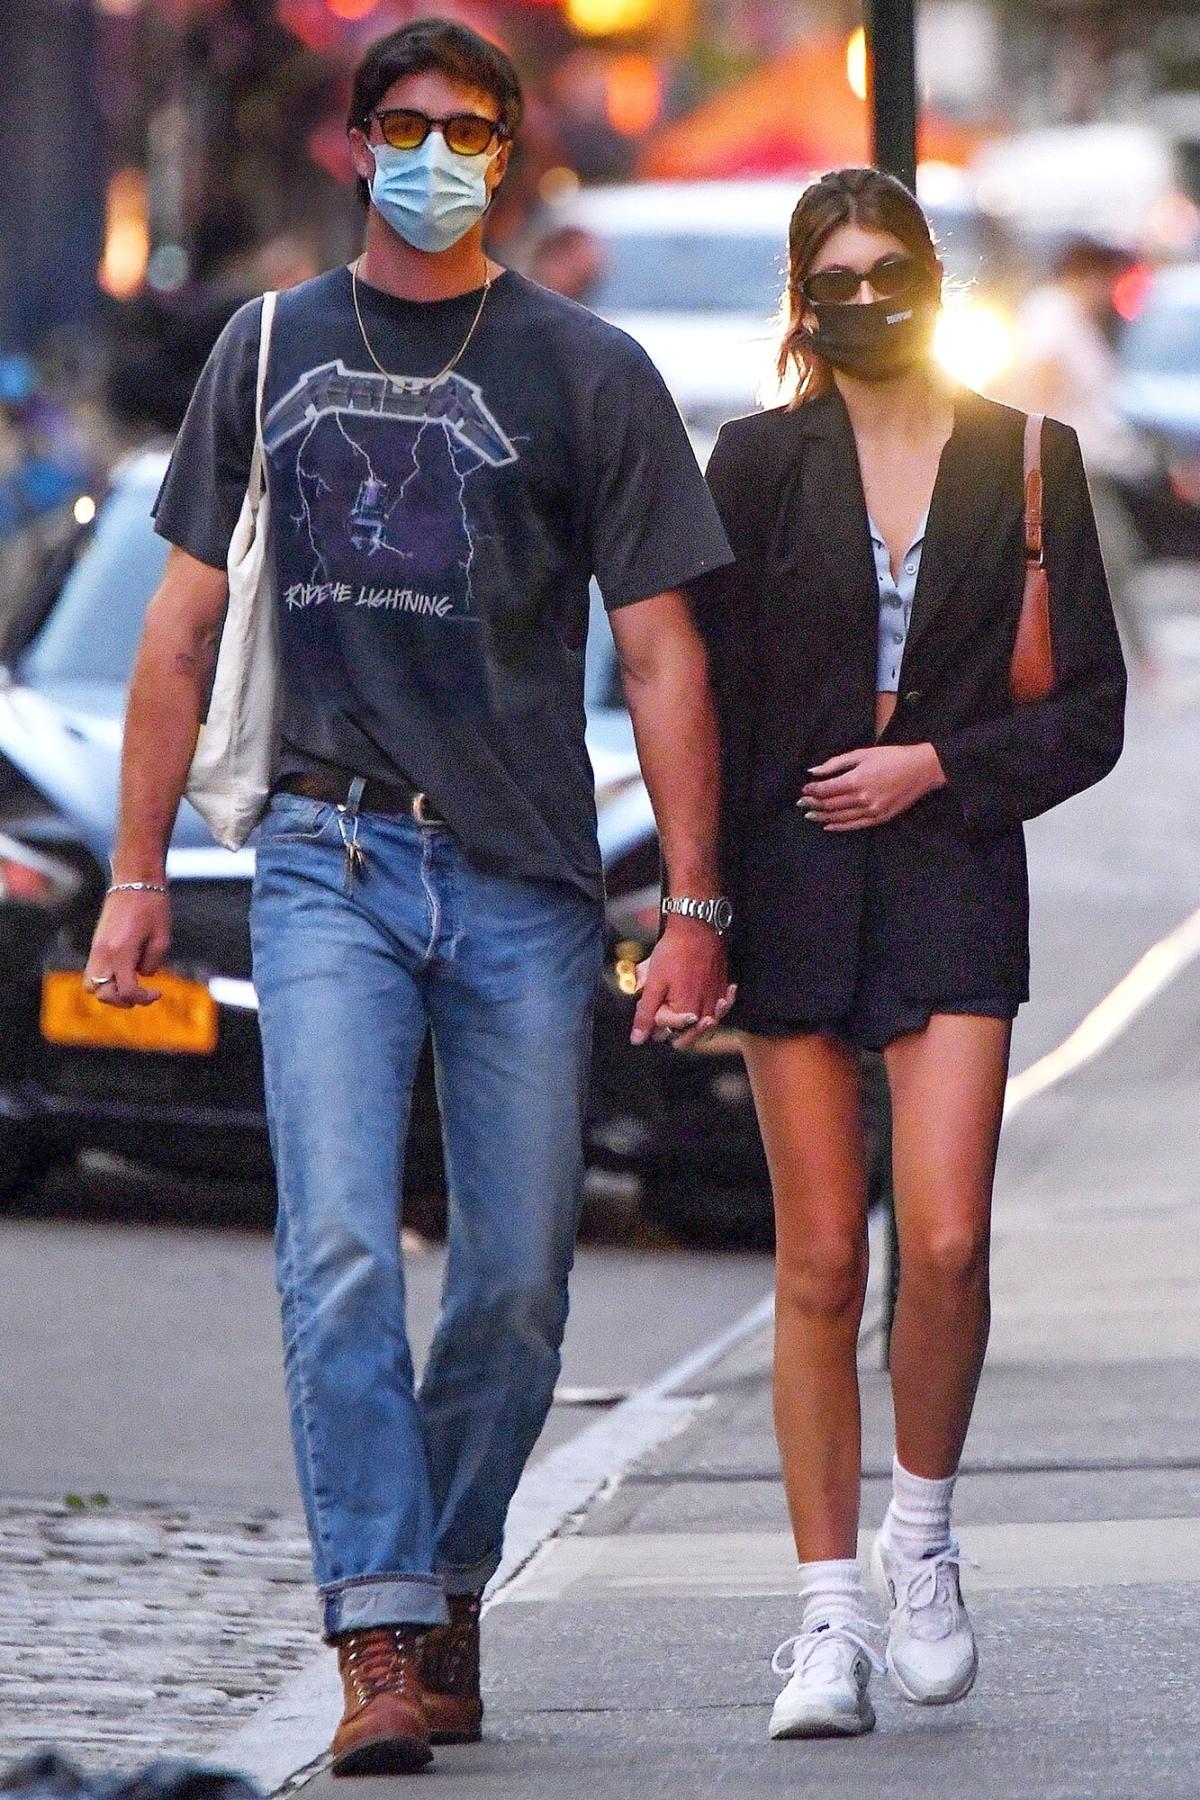 cara and harry holding hands